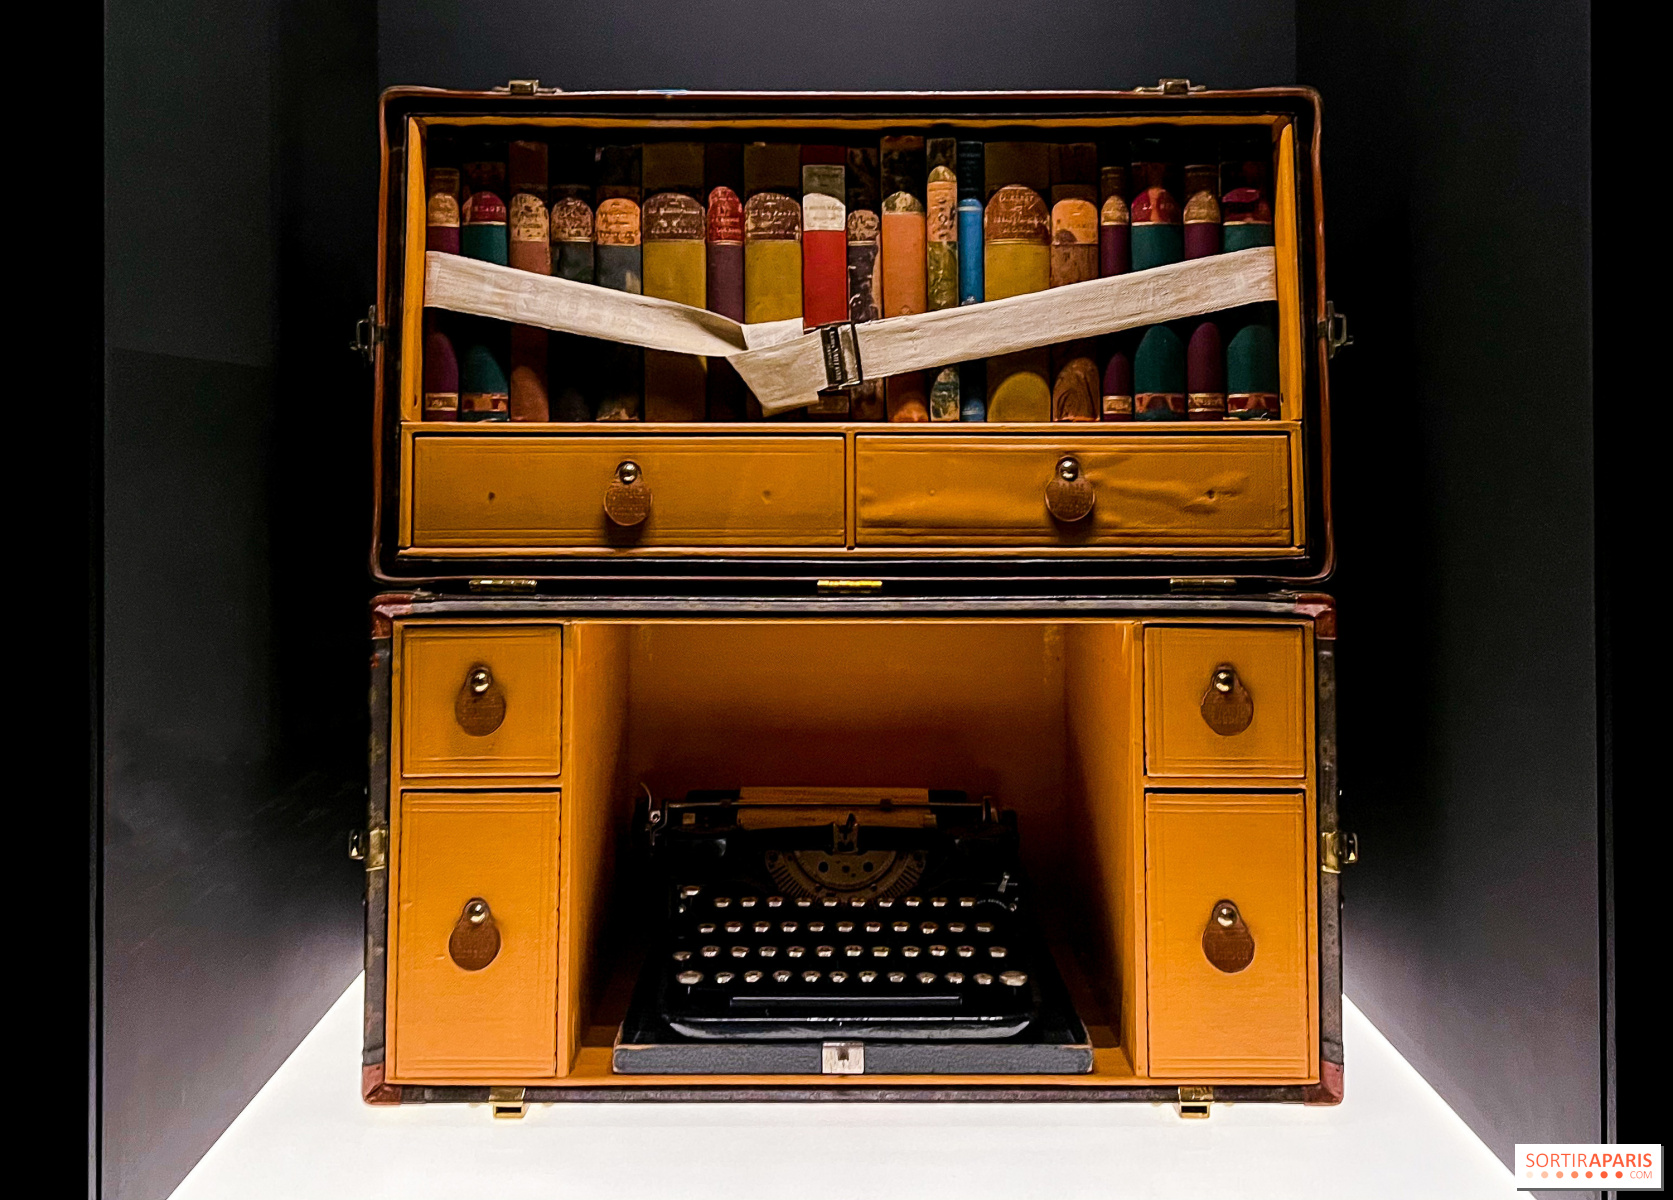 Louis Vuitton on Twitter: The Malle Courrier Exhibition. Delve into  Maison's heritage savoir-faire at the #LouisVuitton Family House in  Asnières with an exhibition inspired by the emblematic Malle Courrier trunk.  Register online